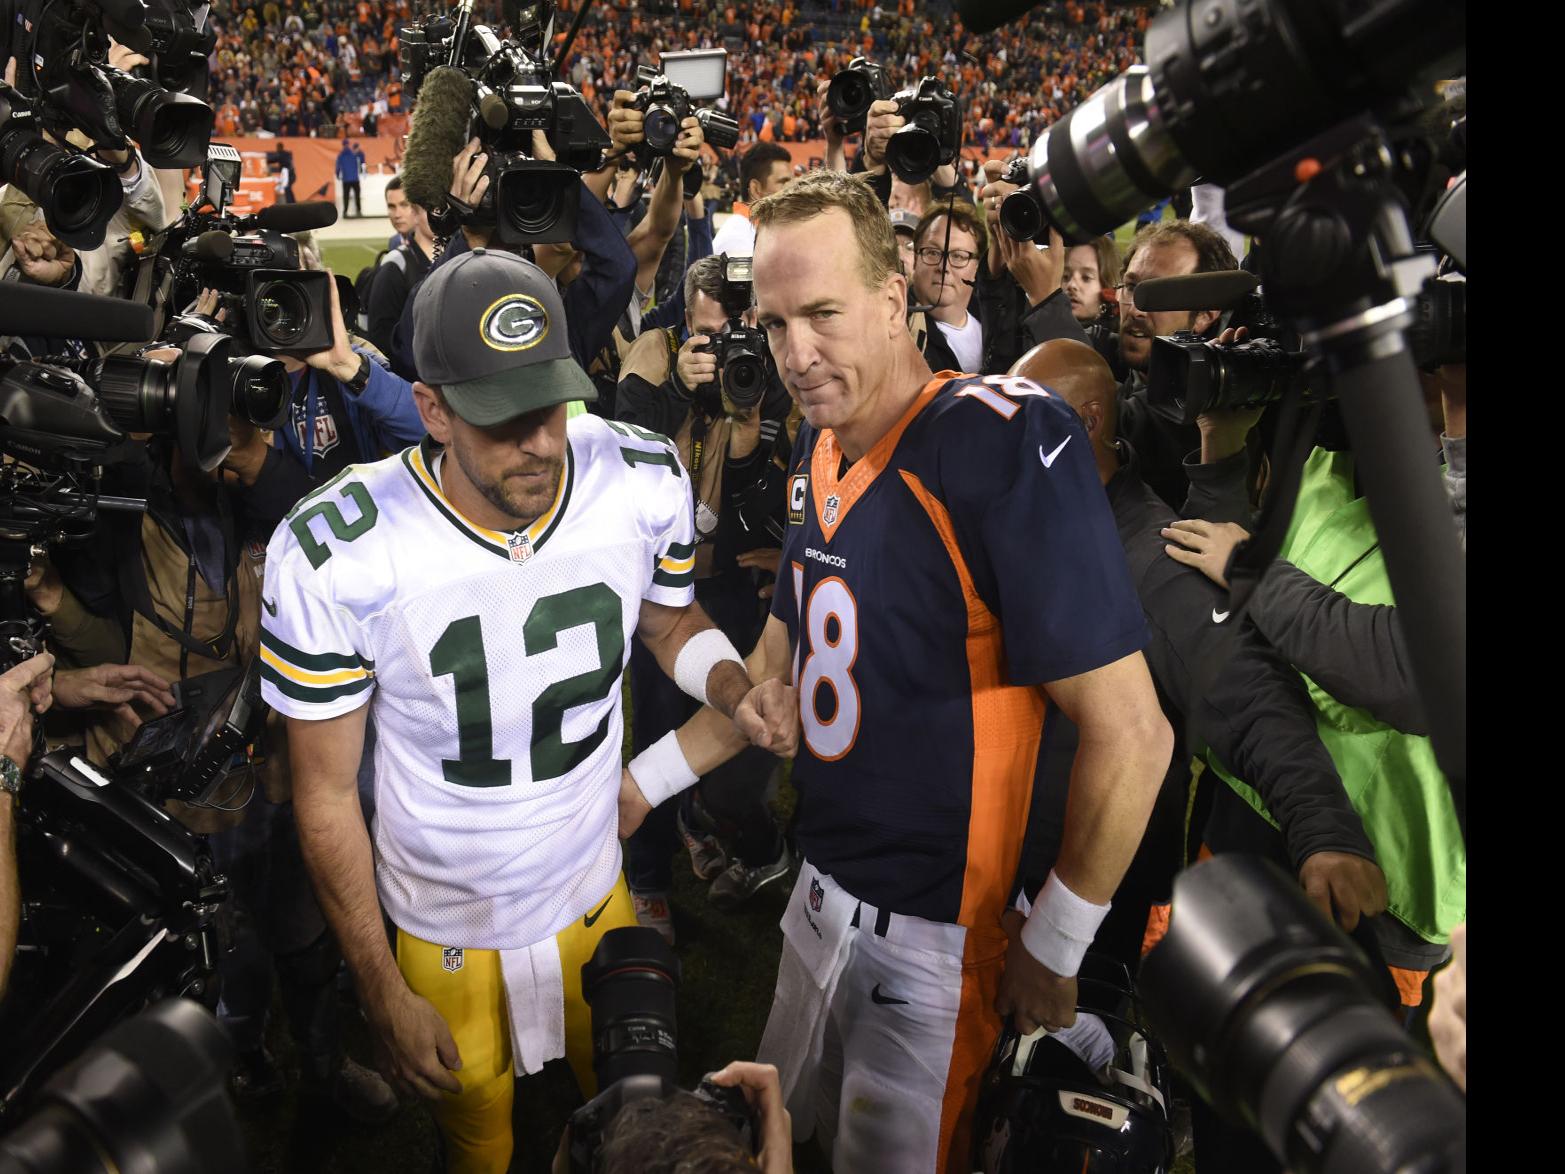 Paul Klee: Aaron Rodgers to the Broncos? Dream an NFL draft day